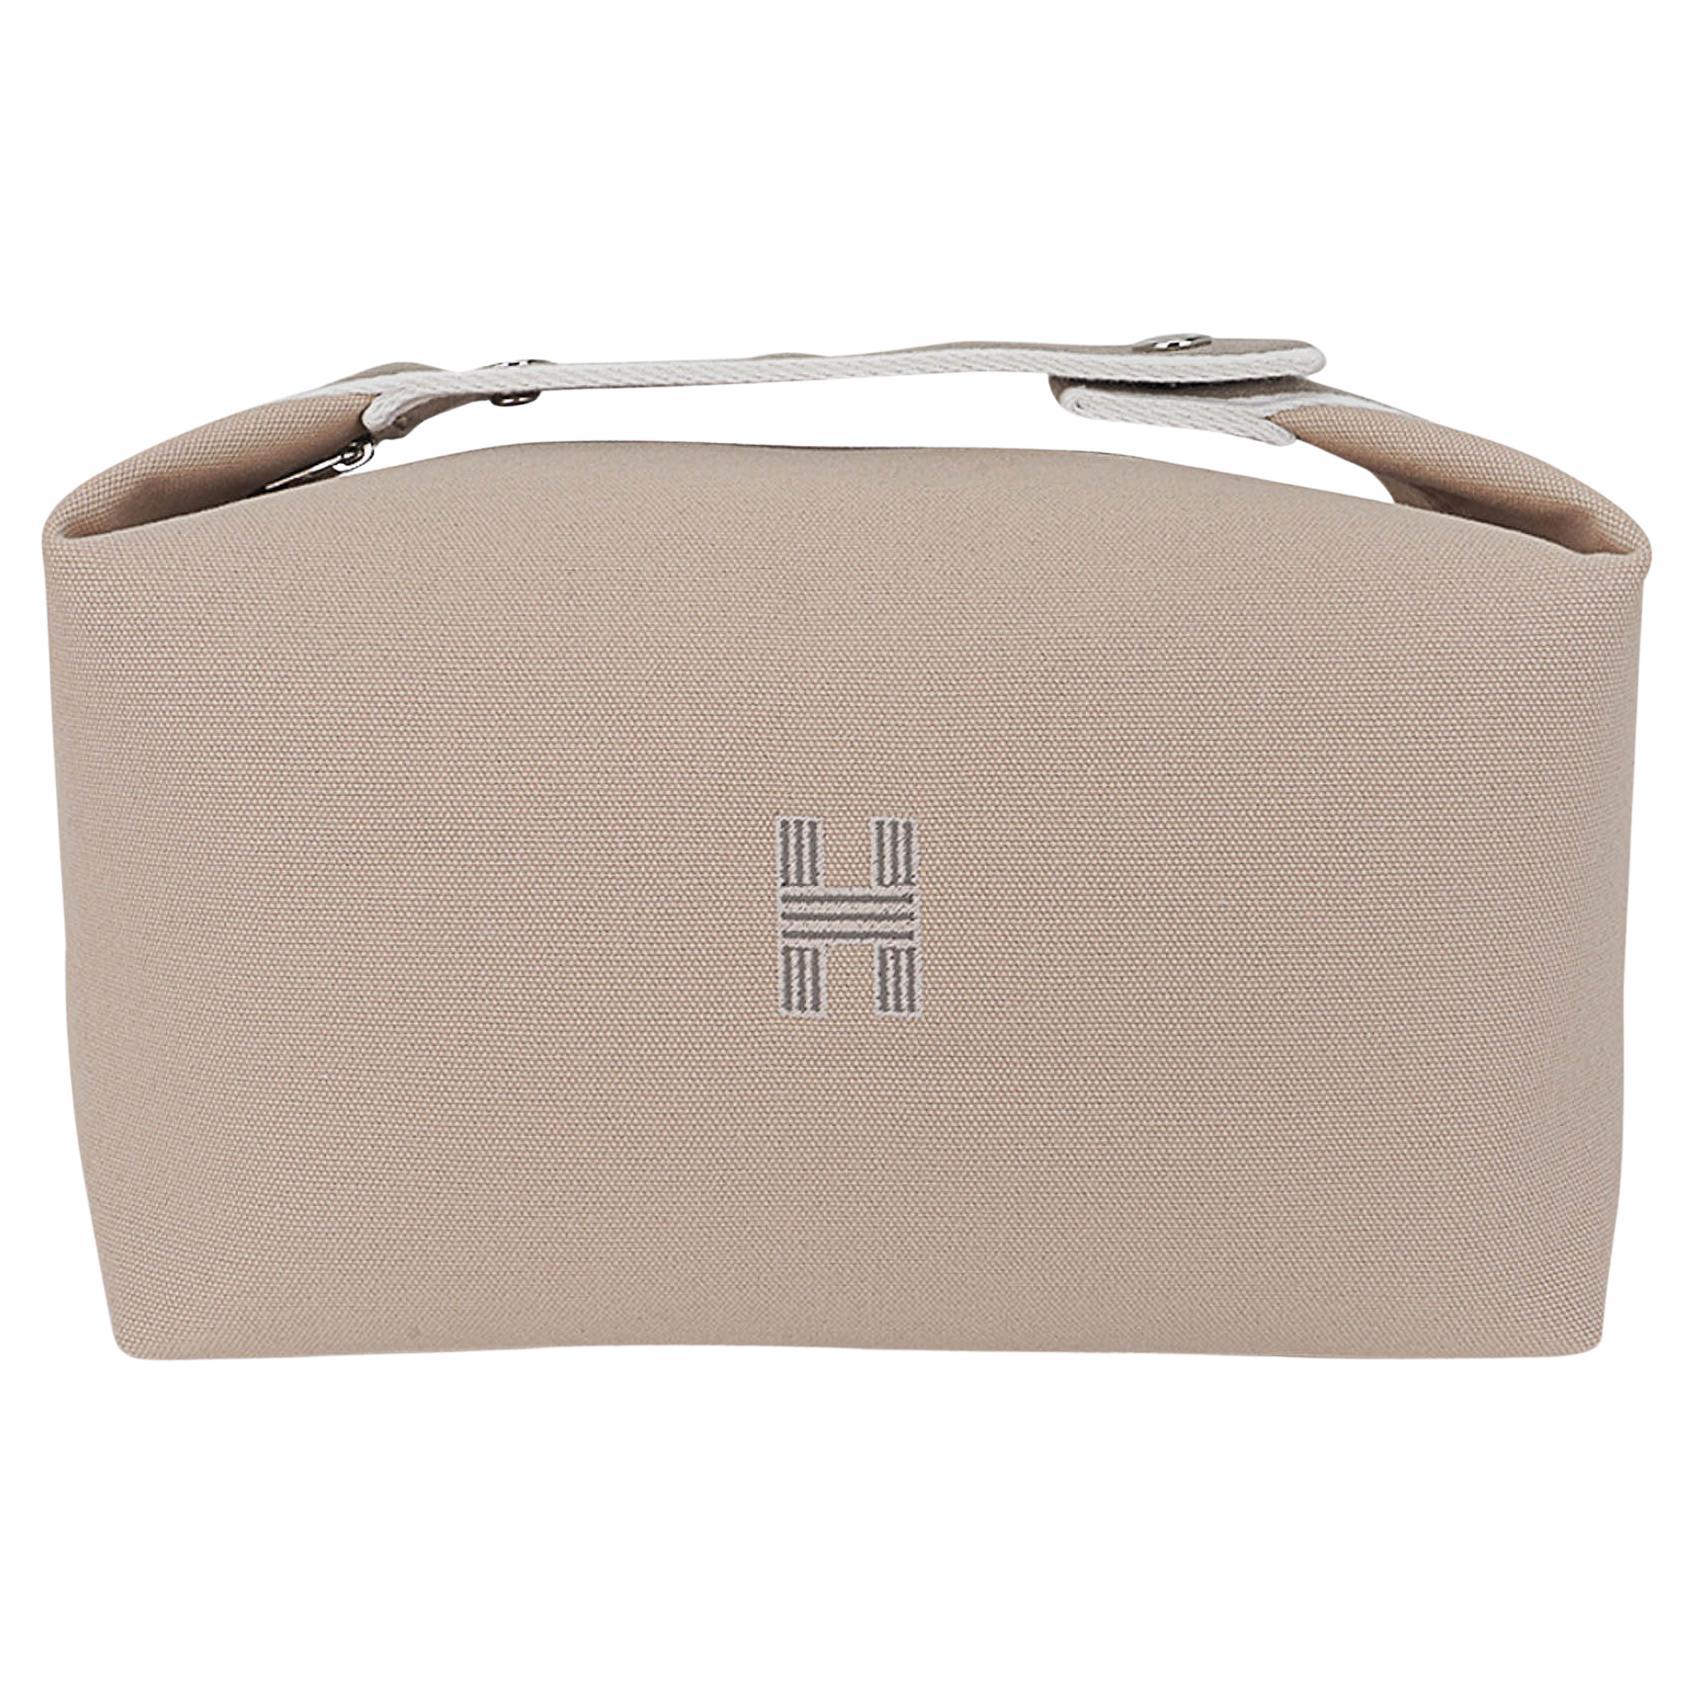 Hermes Cosmetic Case - 8 For Sale on 1stDibs